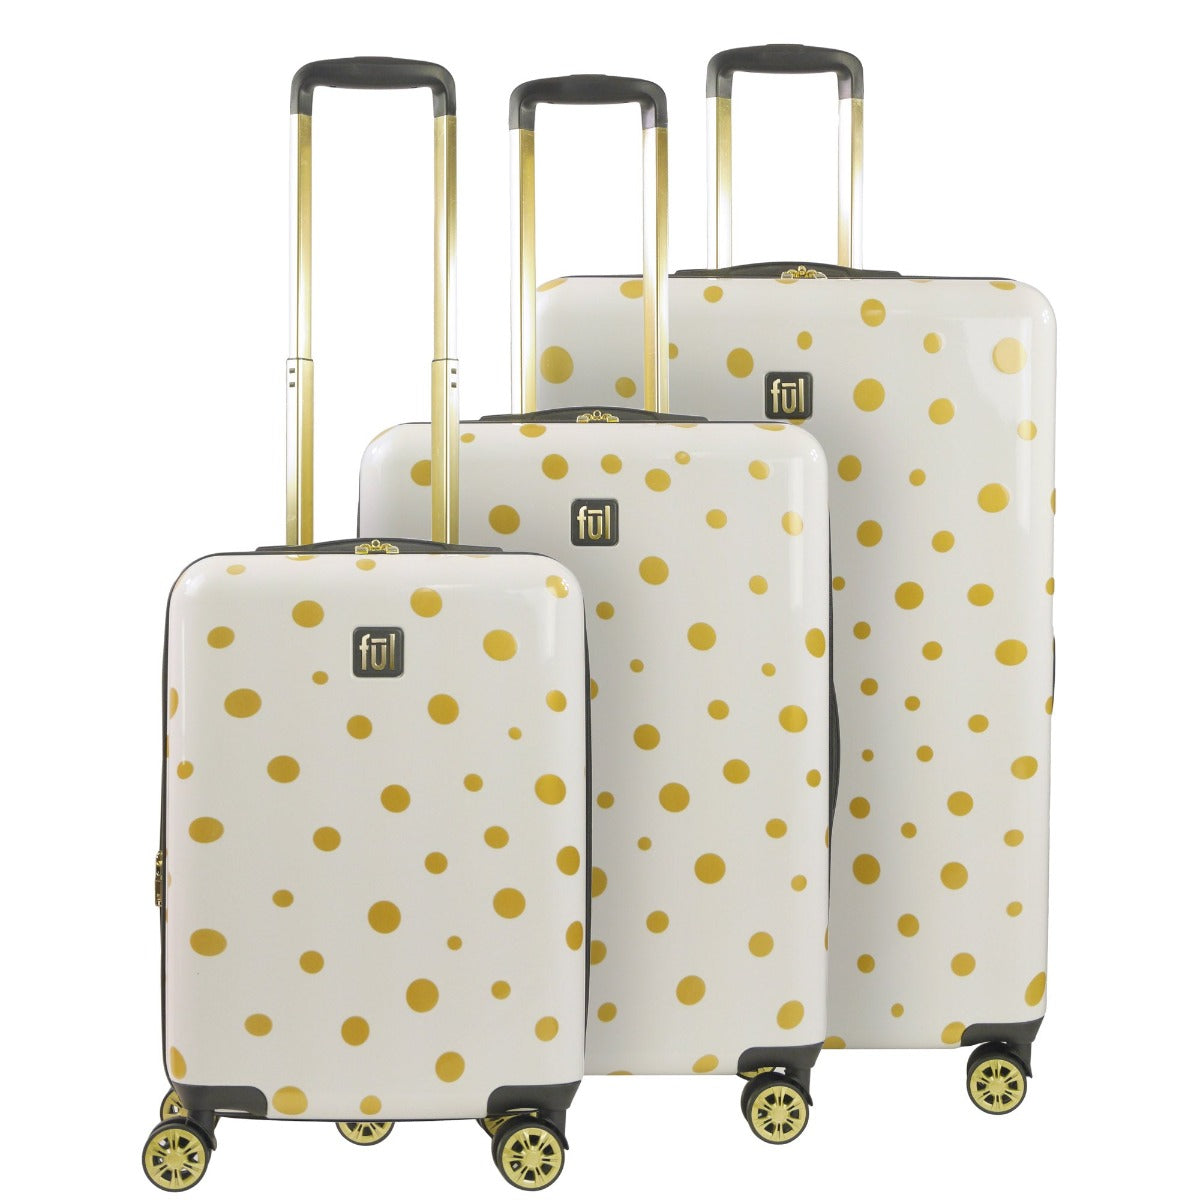 Ful Impulse Mixed Dots Hardsided Spinners suitcase 3 piece luggage set white gold detail polka dots 22 inch 26 inch 31 inch